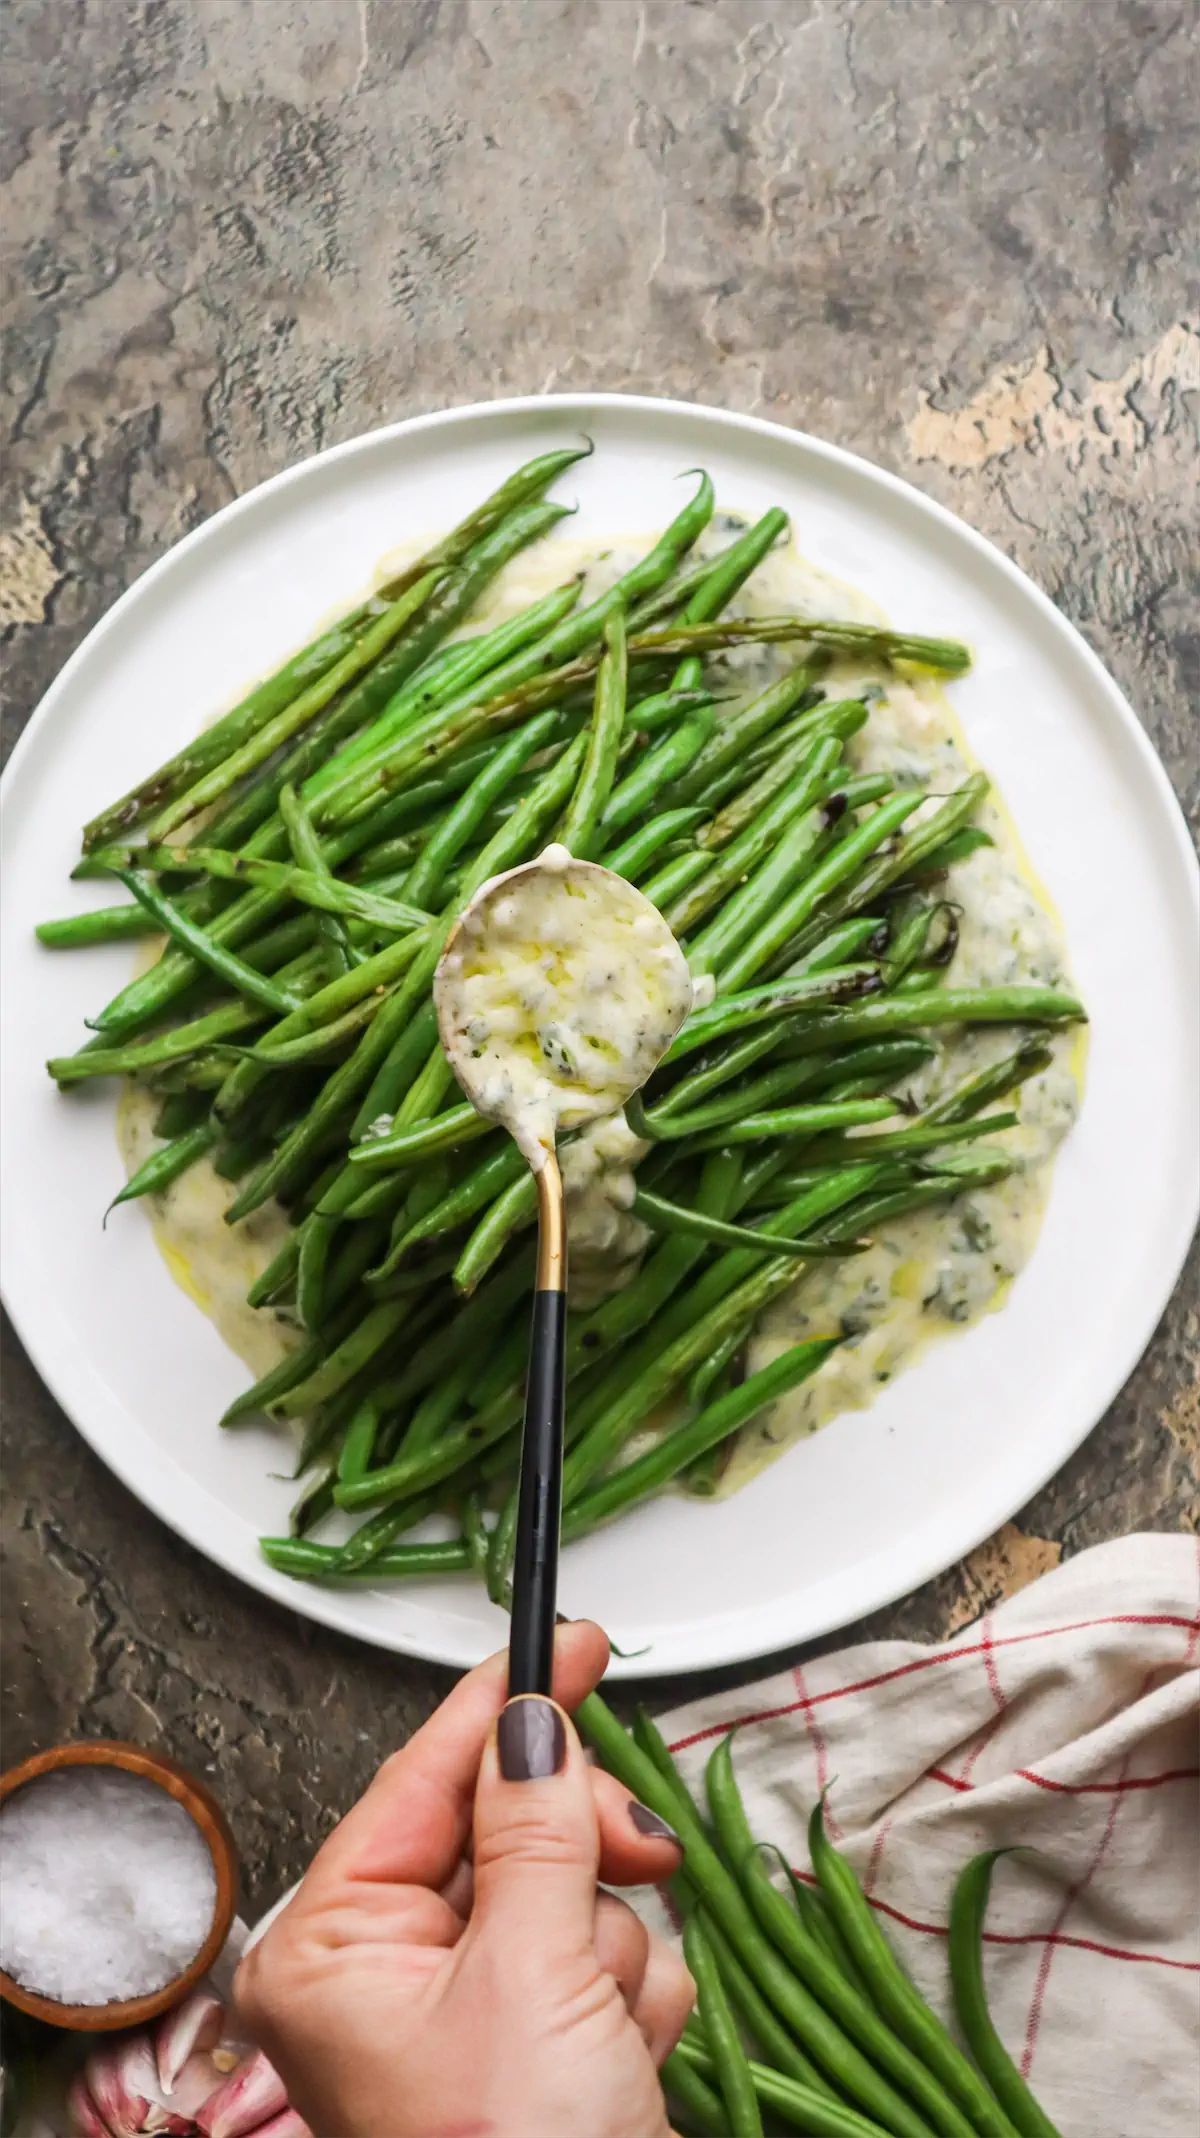 Drizzling yogurt and mint dressing with a spoon over a plate of grilled green beans.